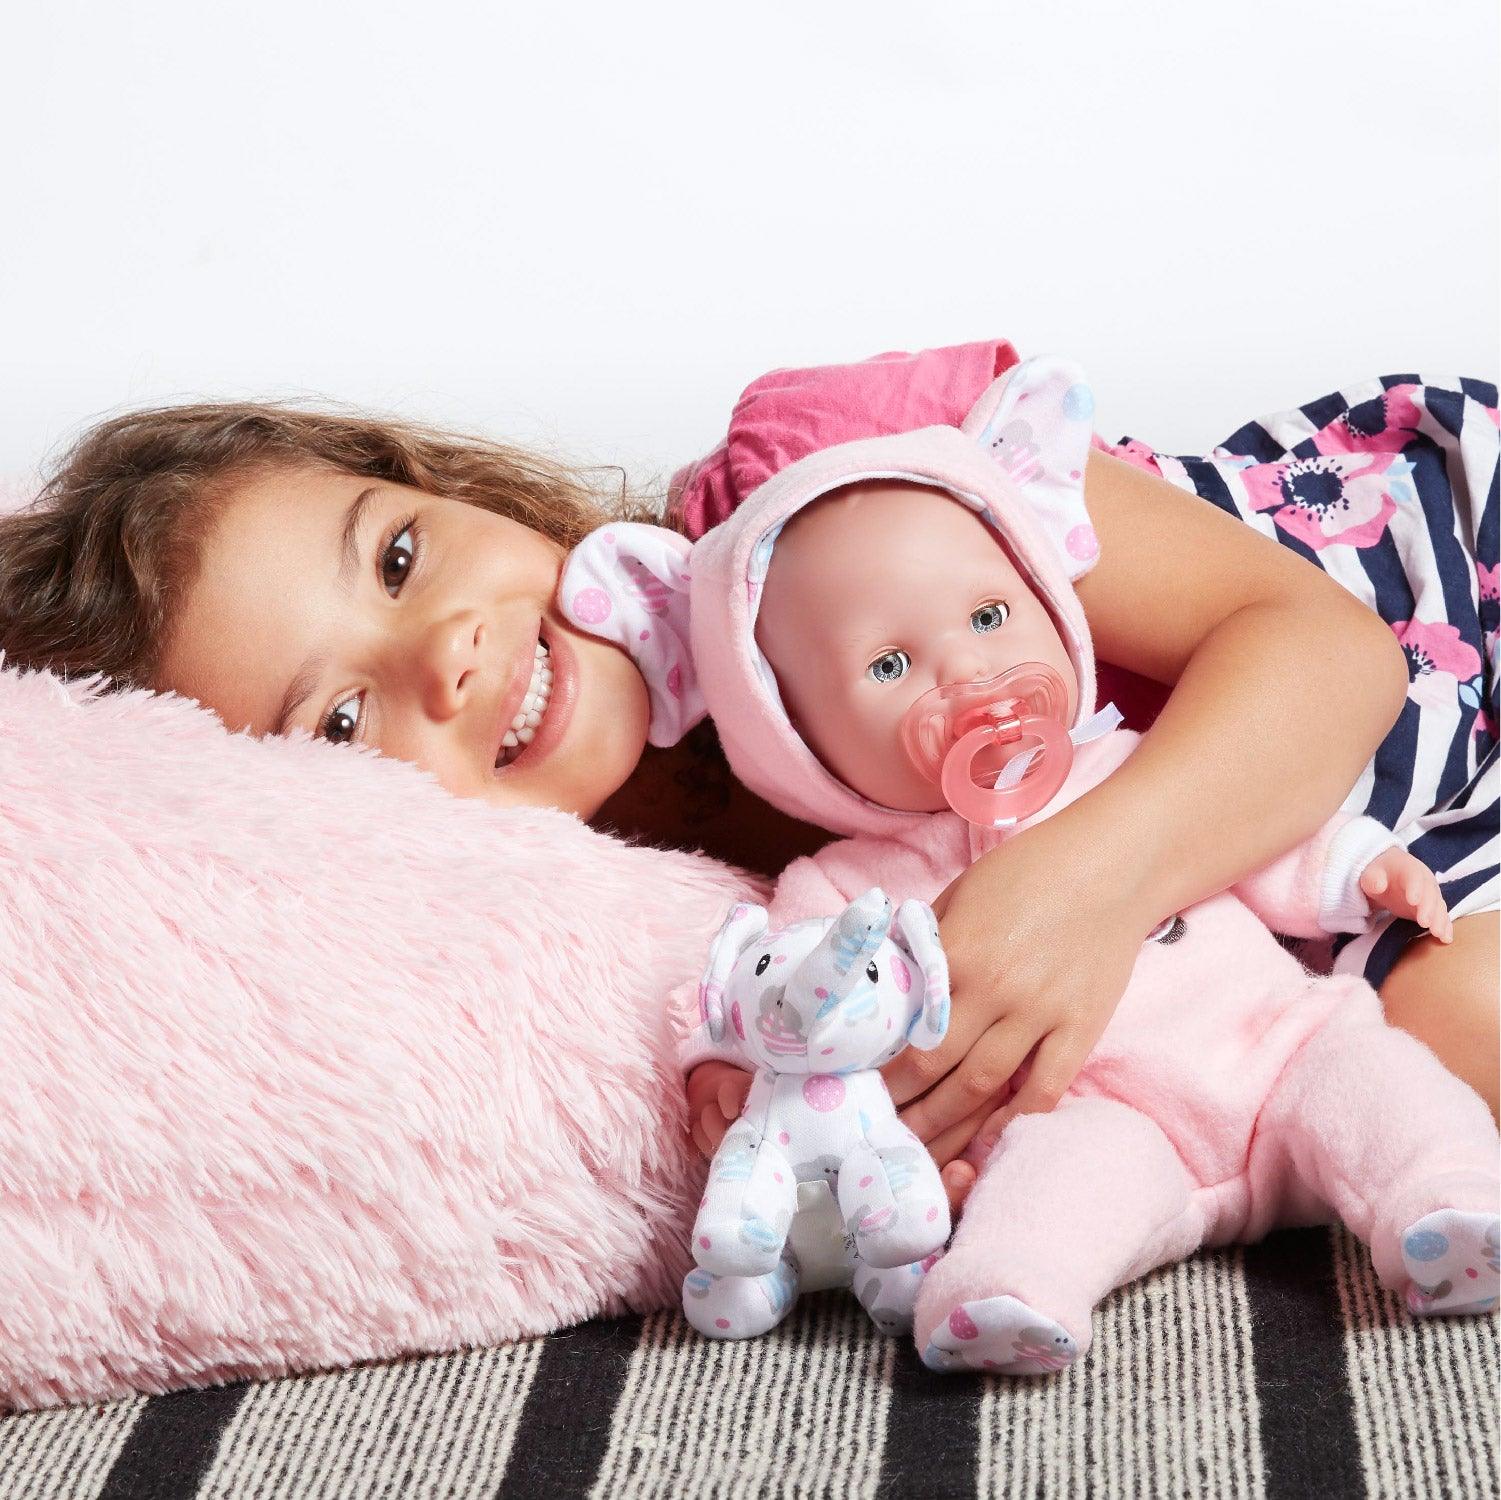 Berenguer Boutique Pink Soft Body 15" Baby Doll Open/Close Eyes w/Play Elephant For Children 2+ - JC Toys Group Inc.